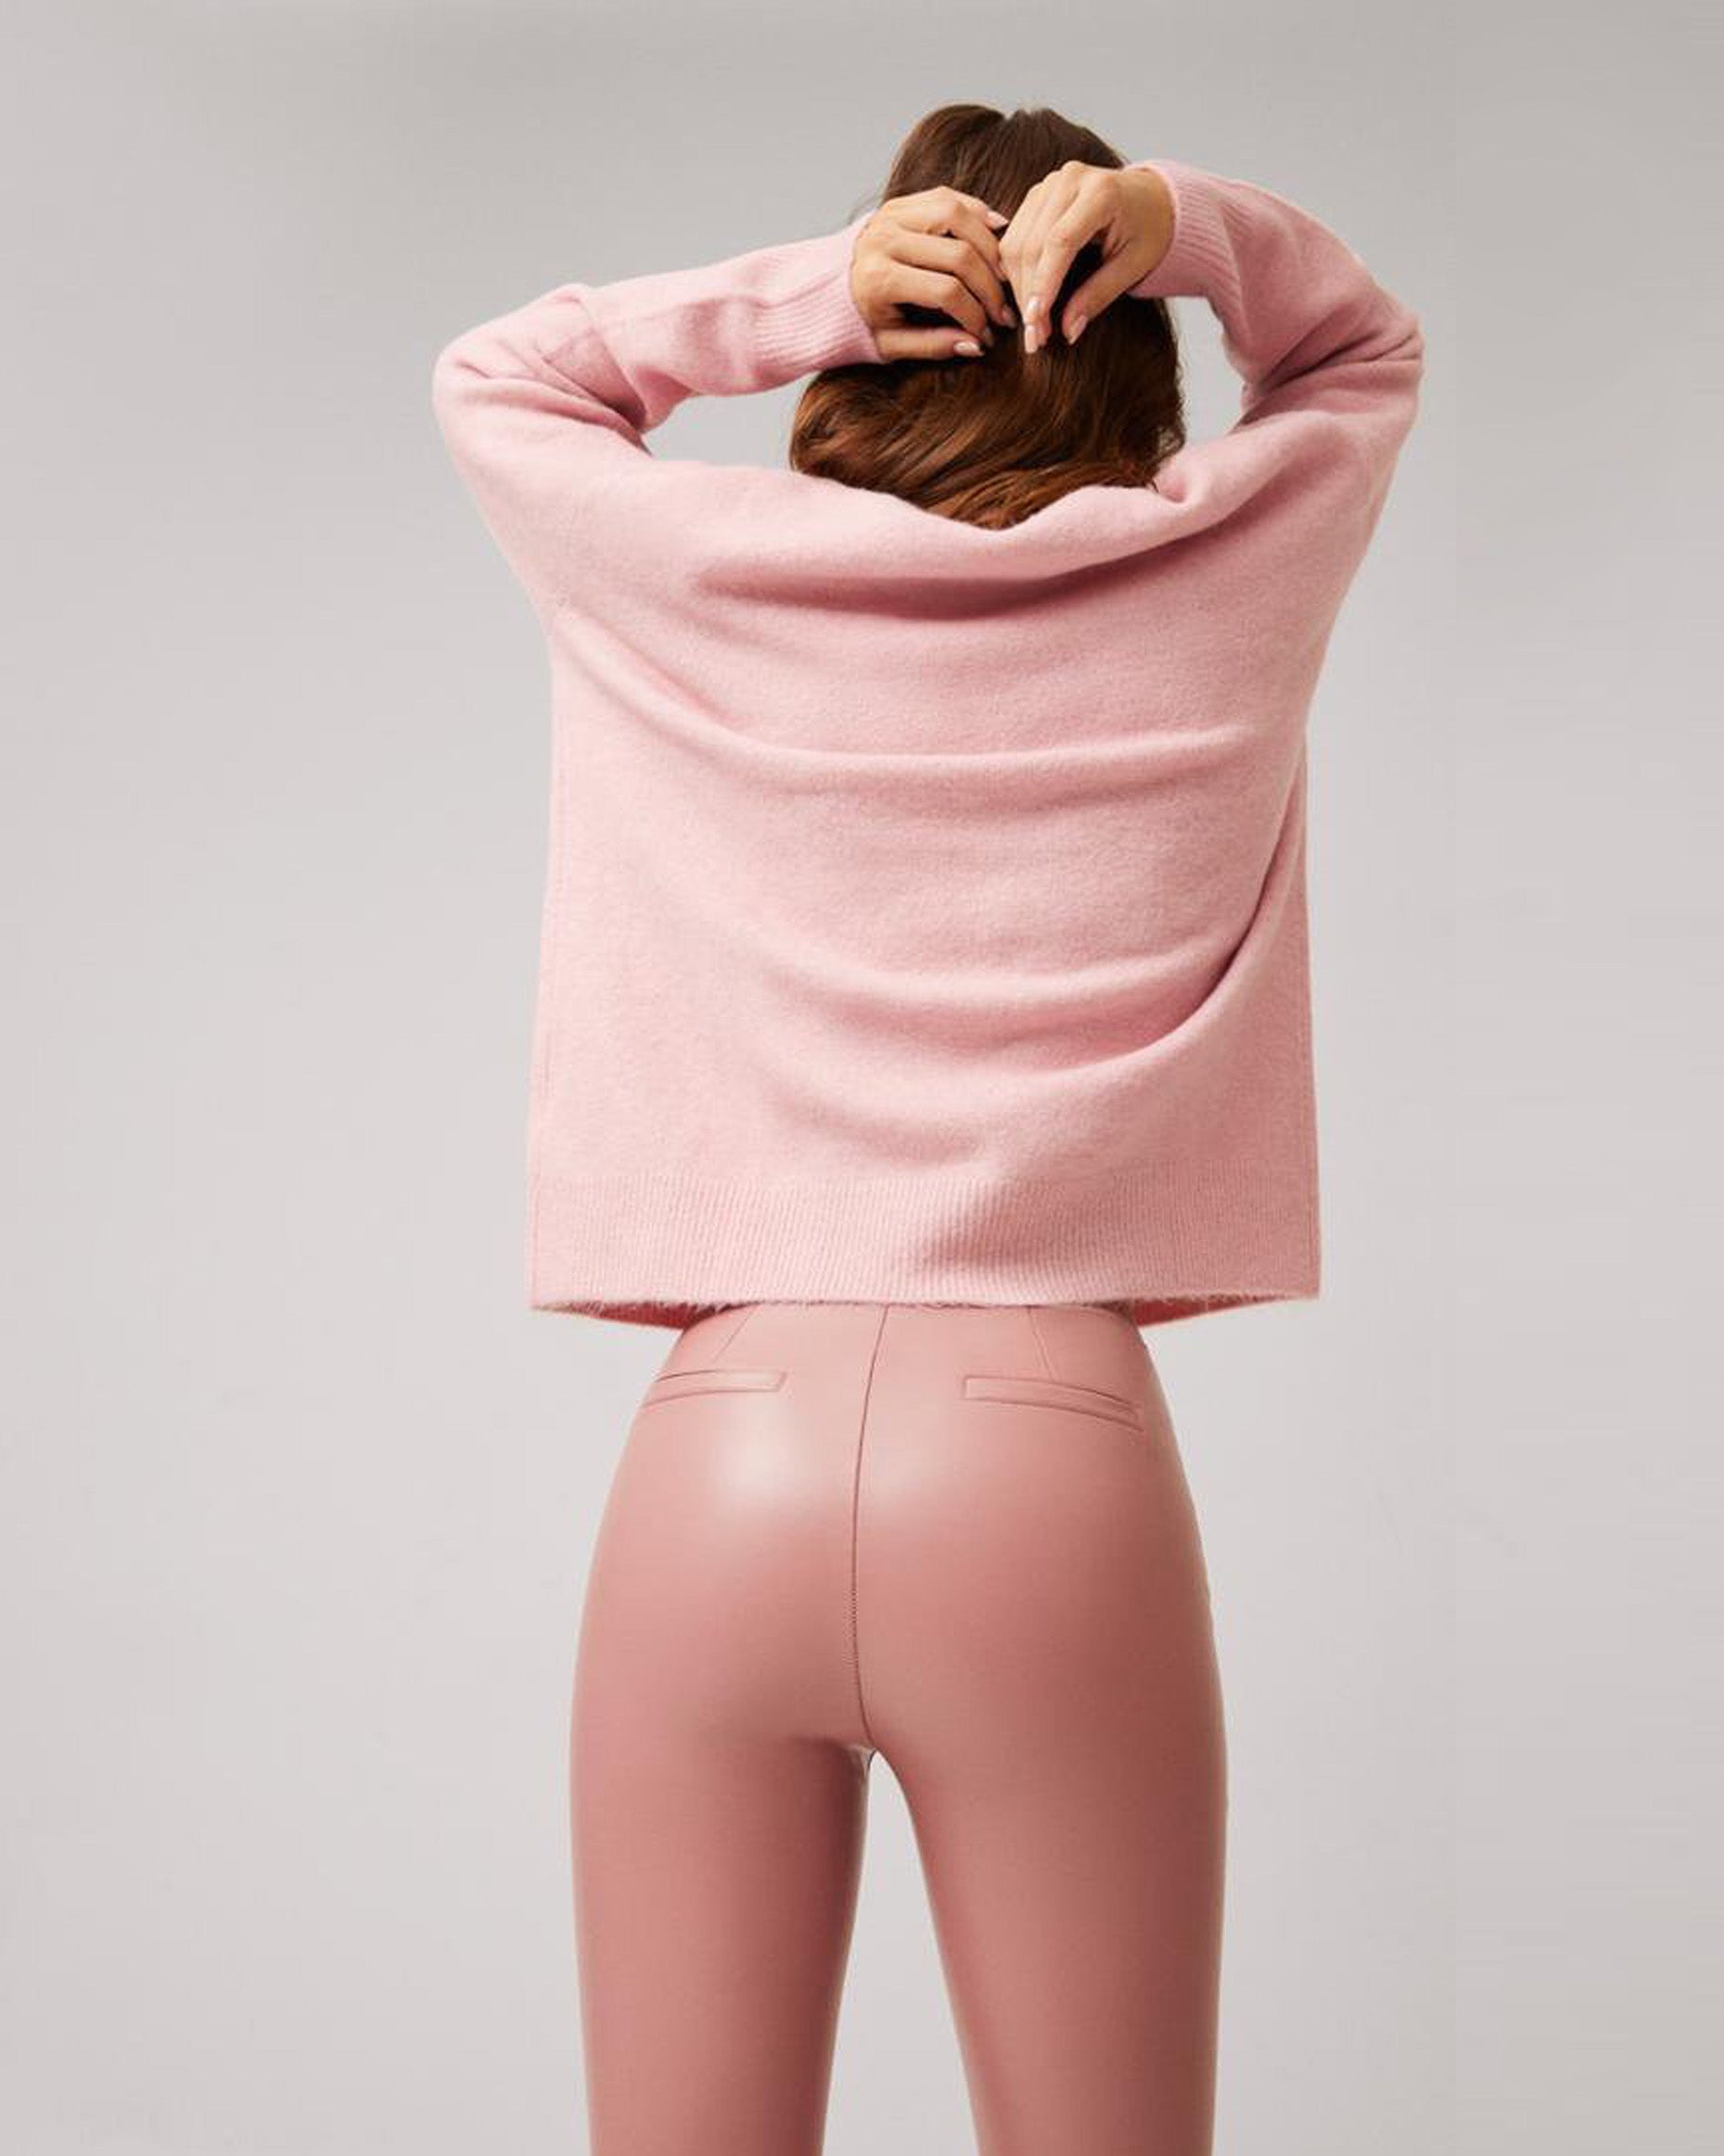 Ysabel Mora 70296 Faux Leather Cropped Pants - Pale dirty pink flared crop faux leather thermal leggings with a soft and warm plush lining. Worn with a light dusty pink knitted jumper.